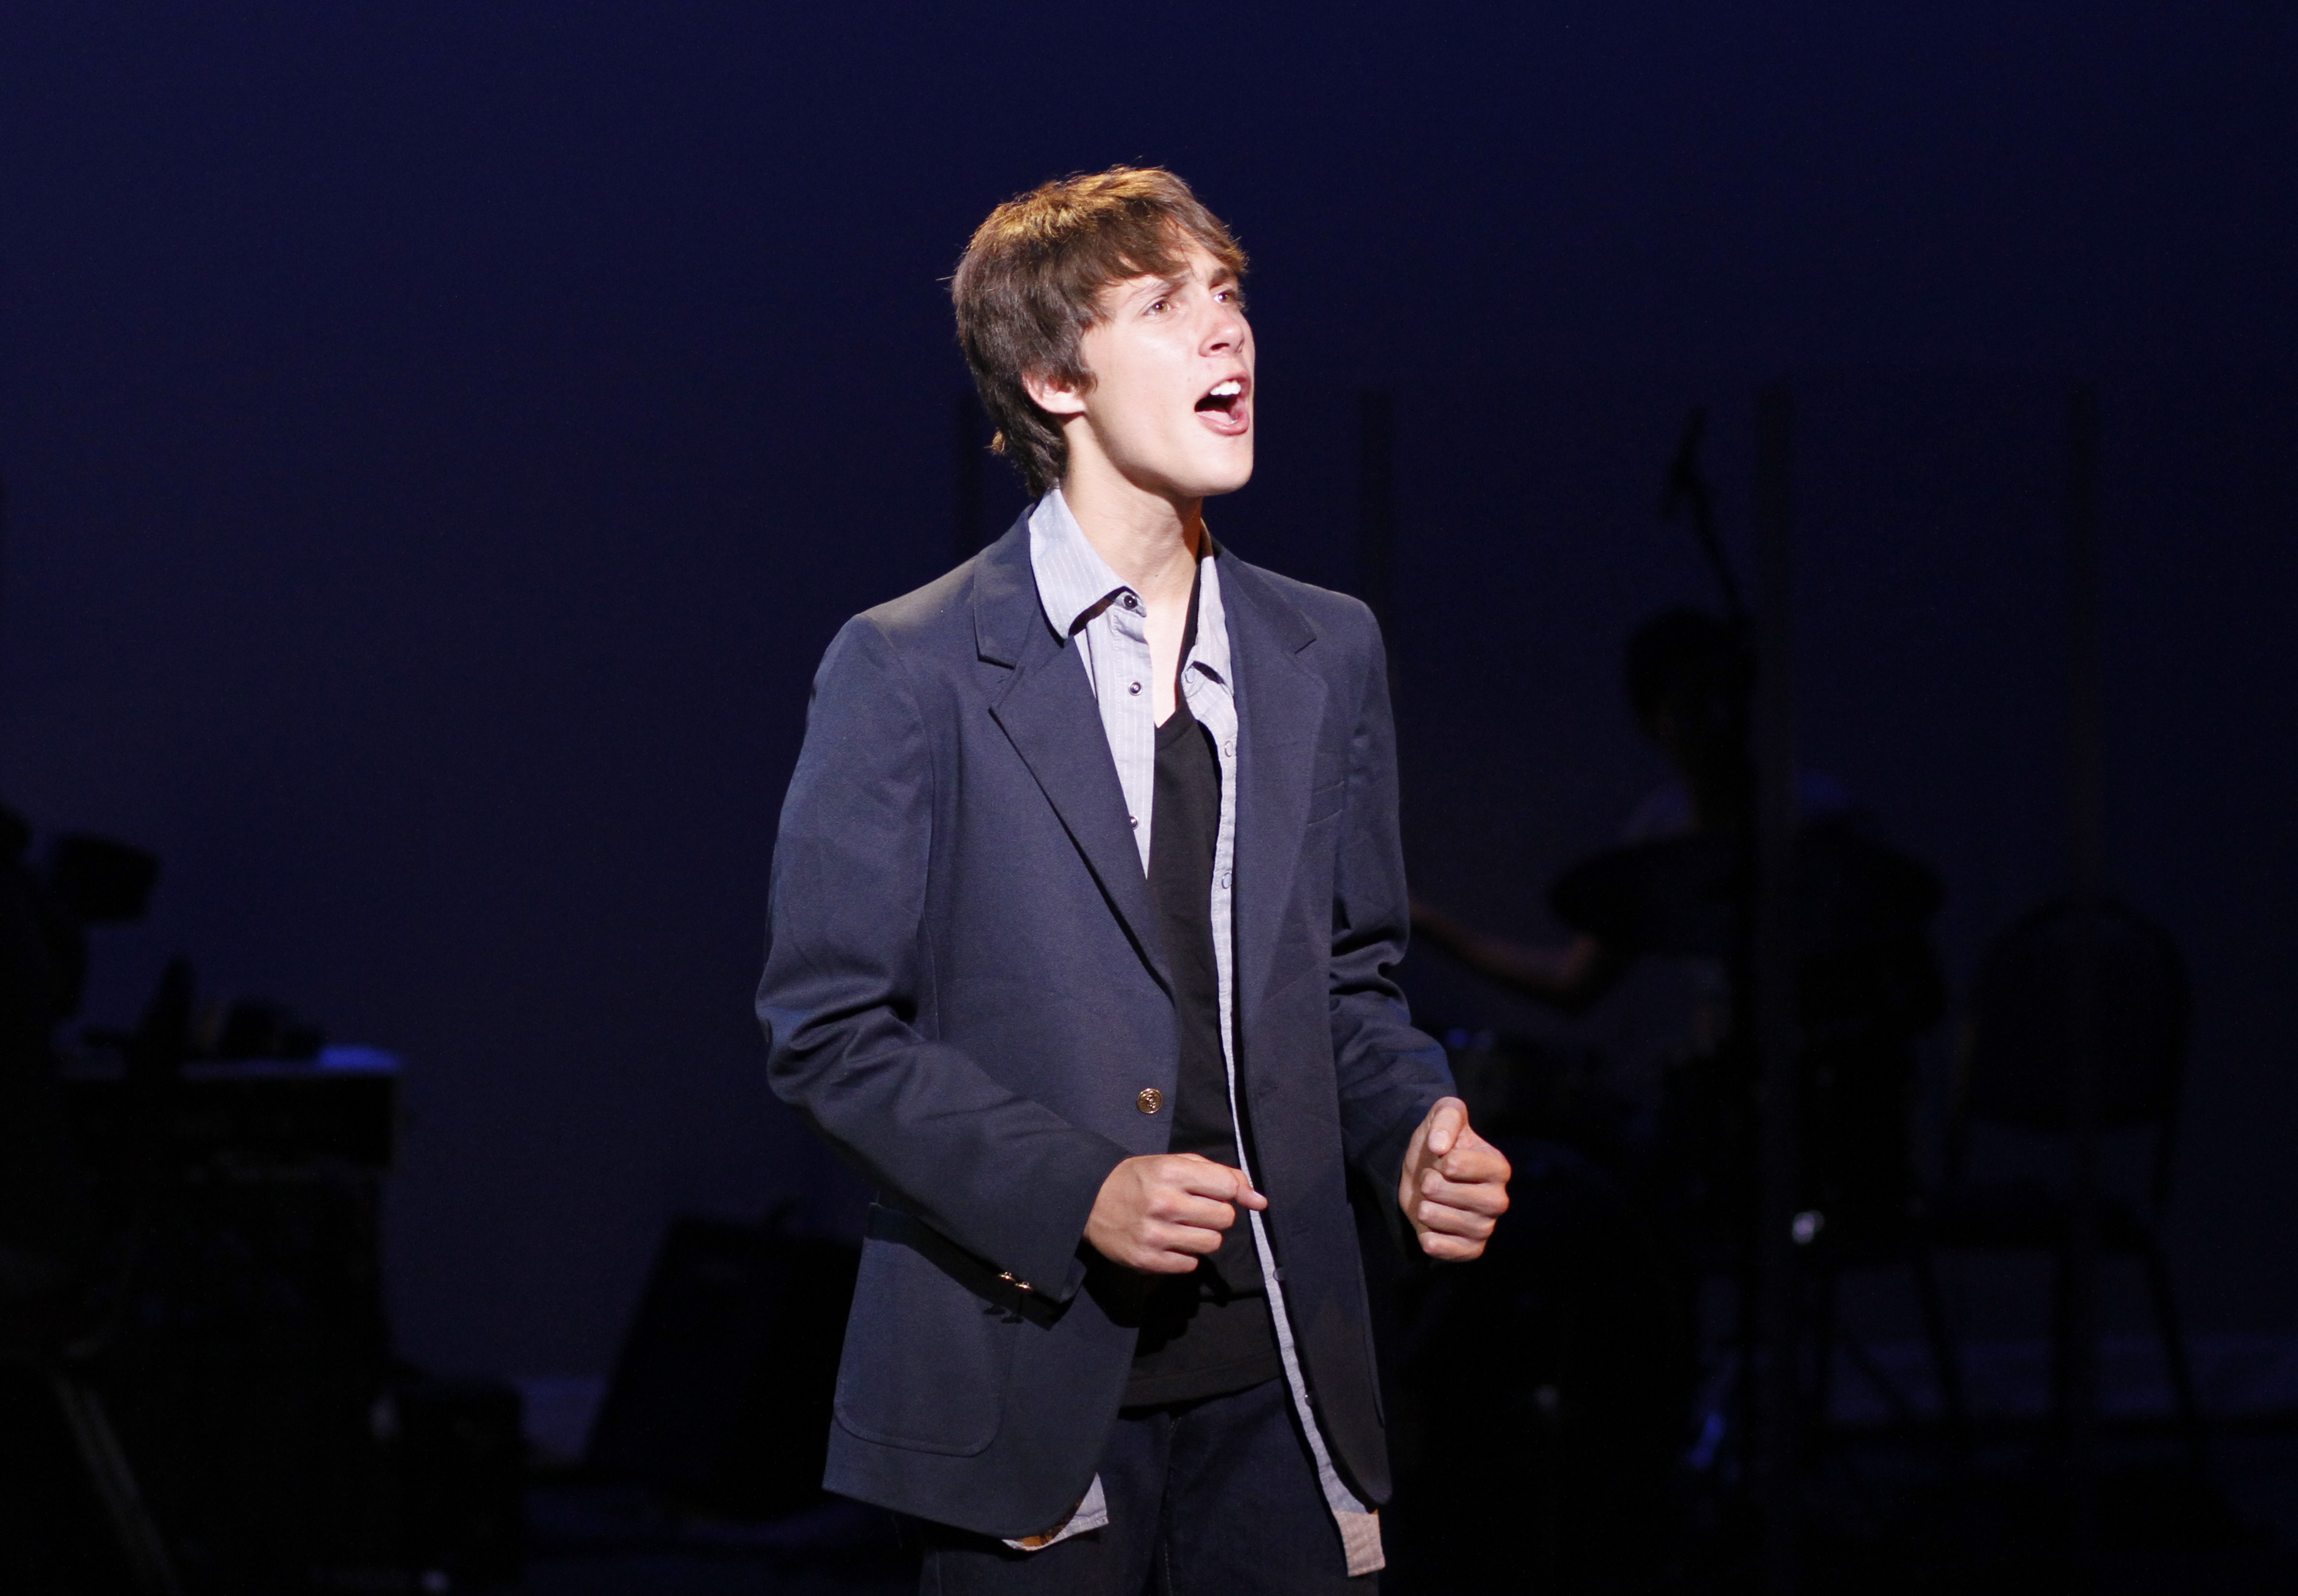 Cameron as Evan in 13 The Musical.